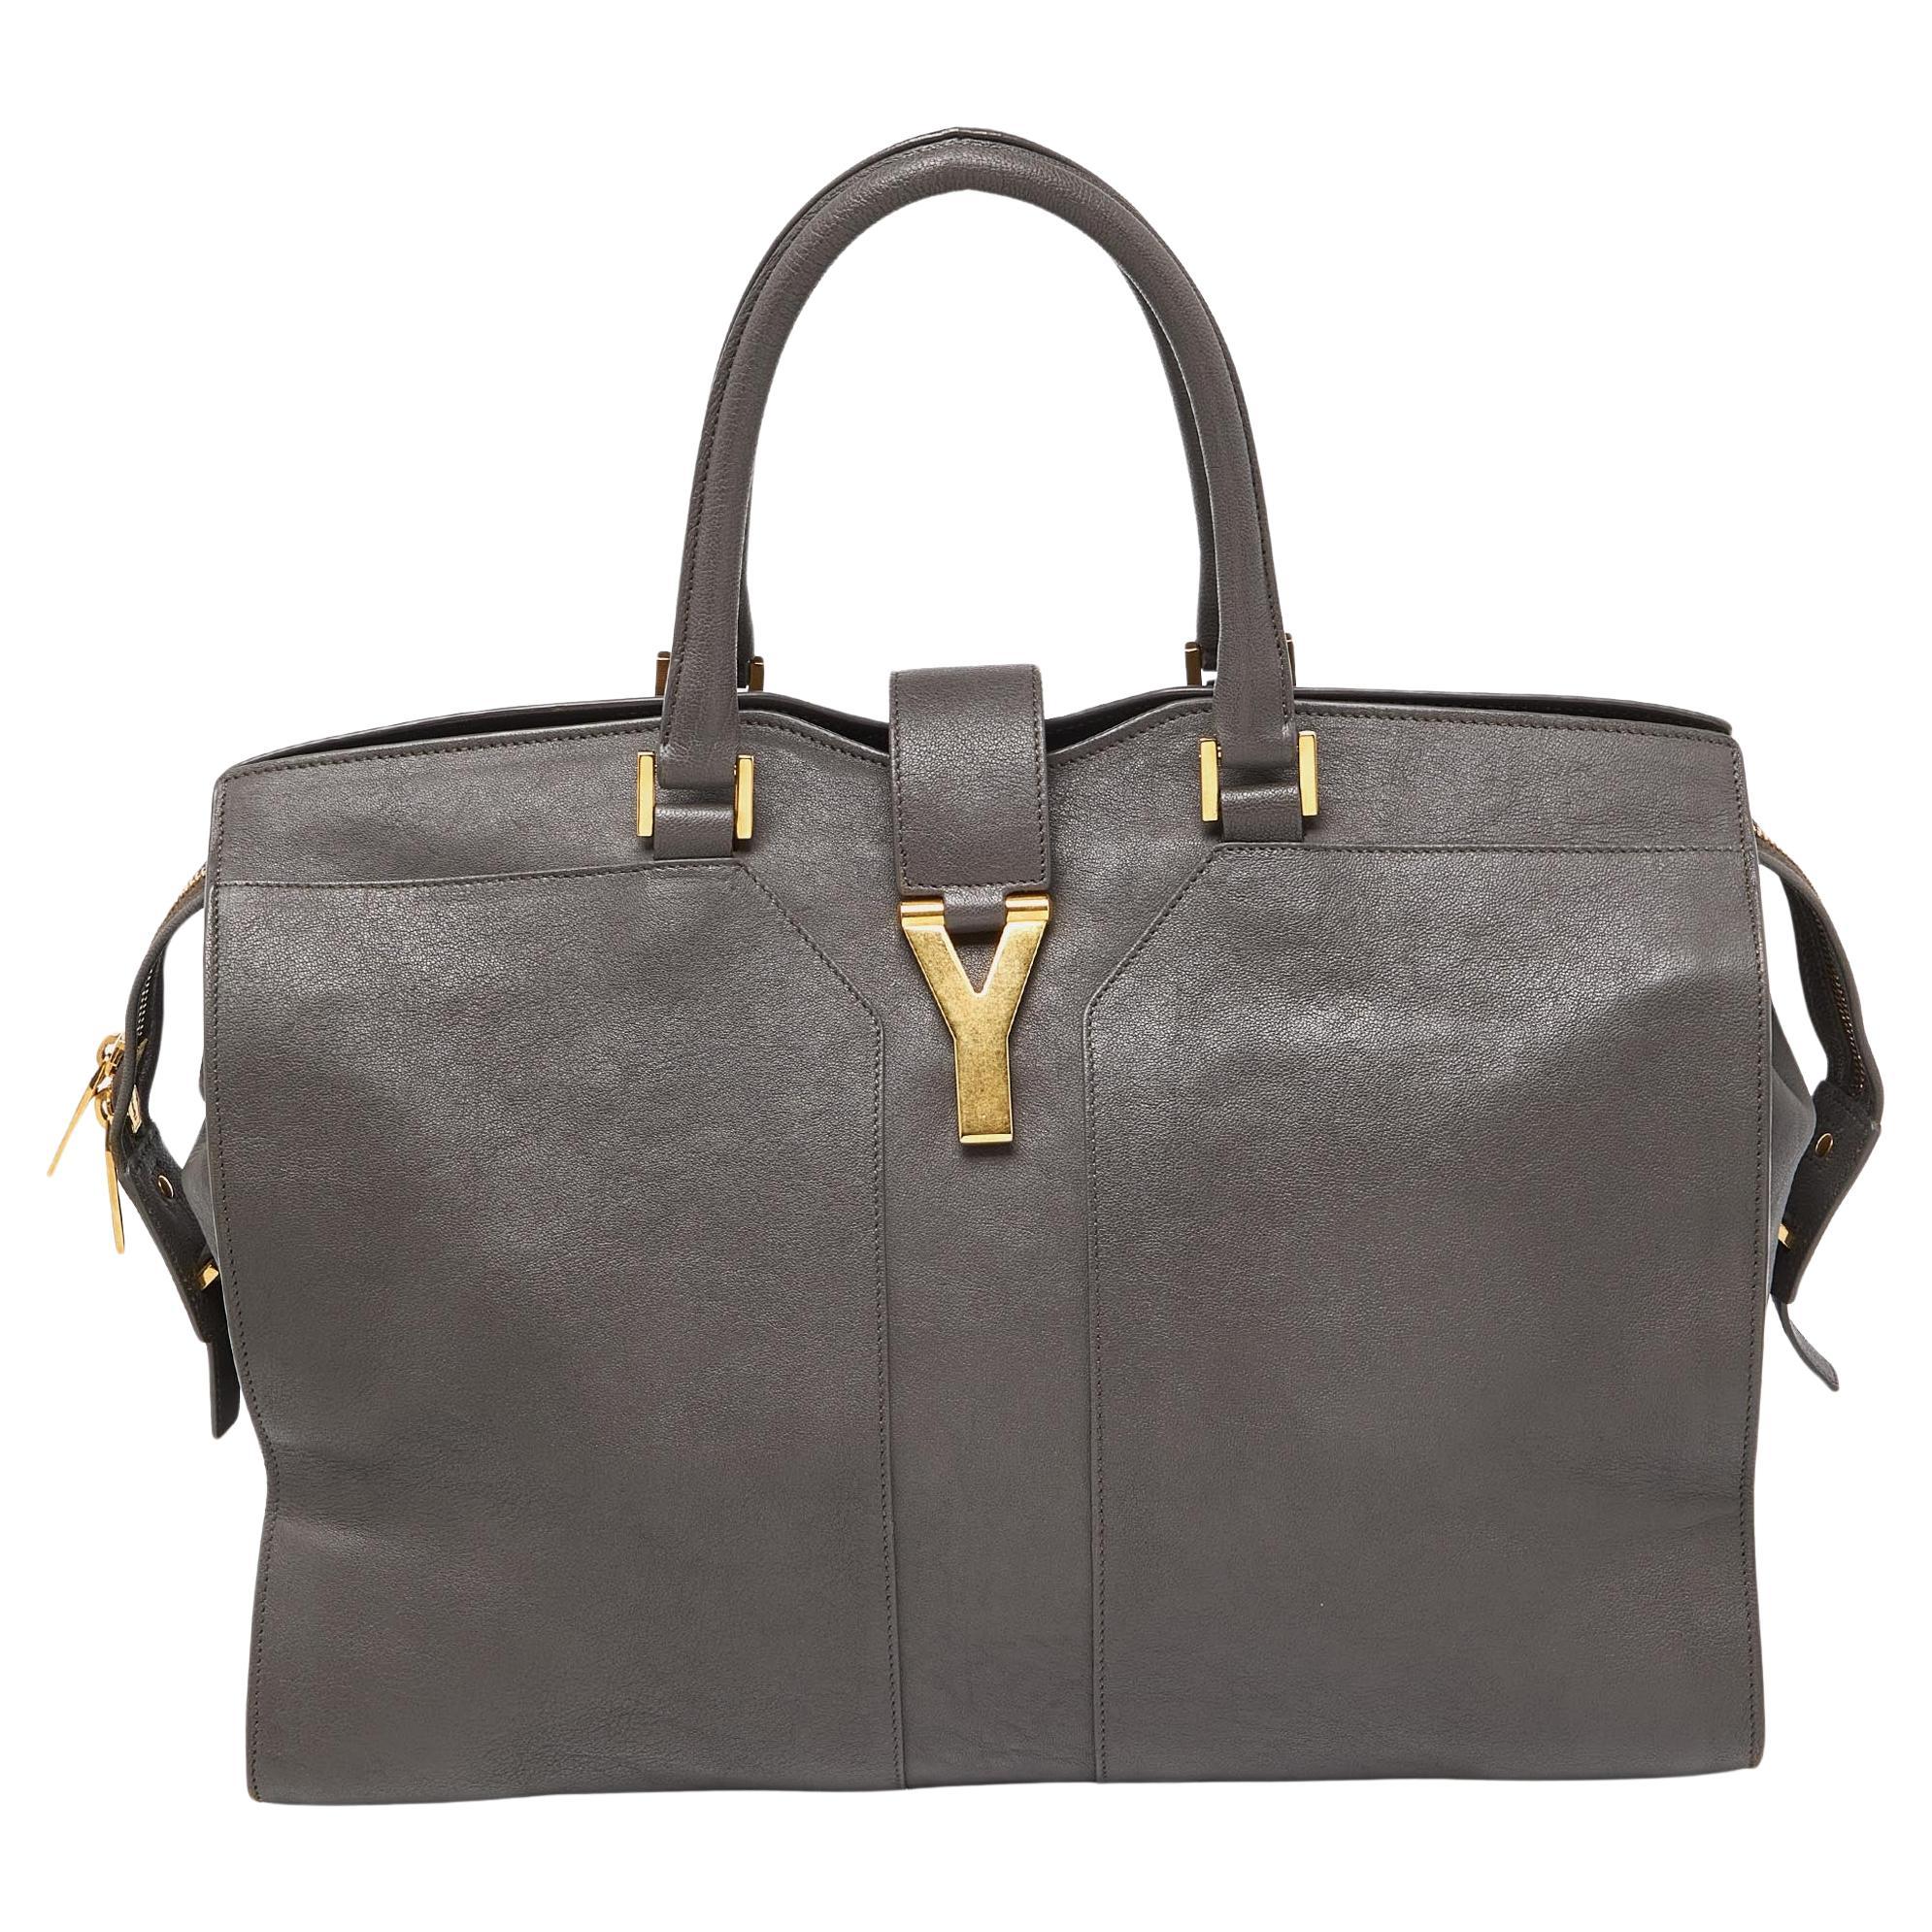 Yves Saint Laurent Grey Leather Large Cabas Chyc Tote For Sale